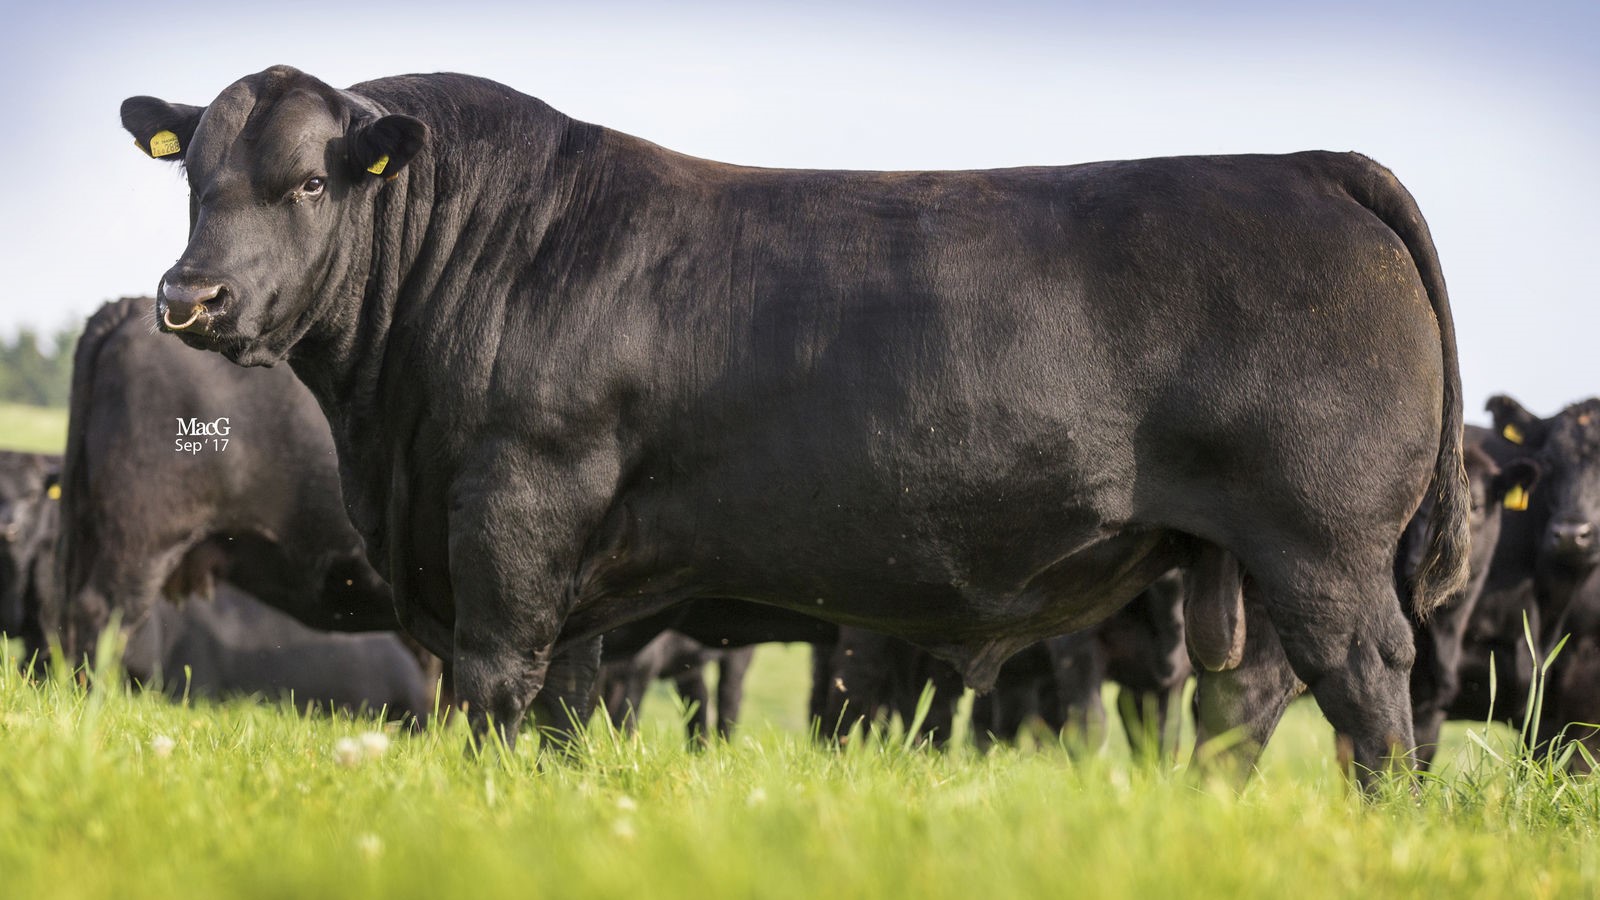 An Aberdeen-Angus Bull looking towards the camera